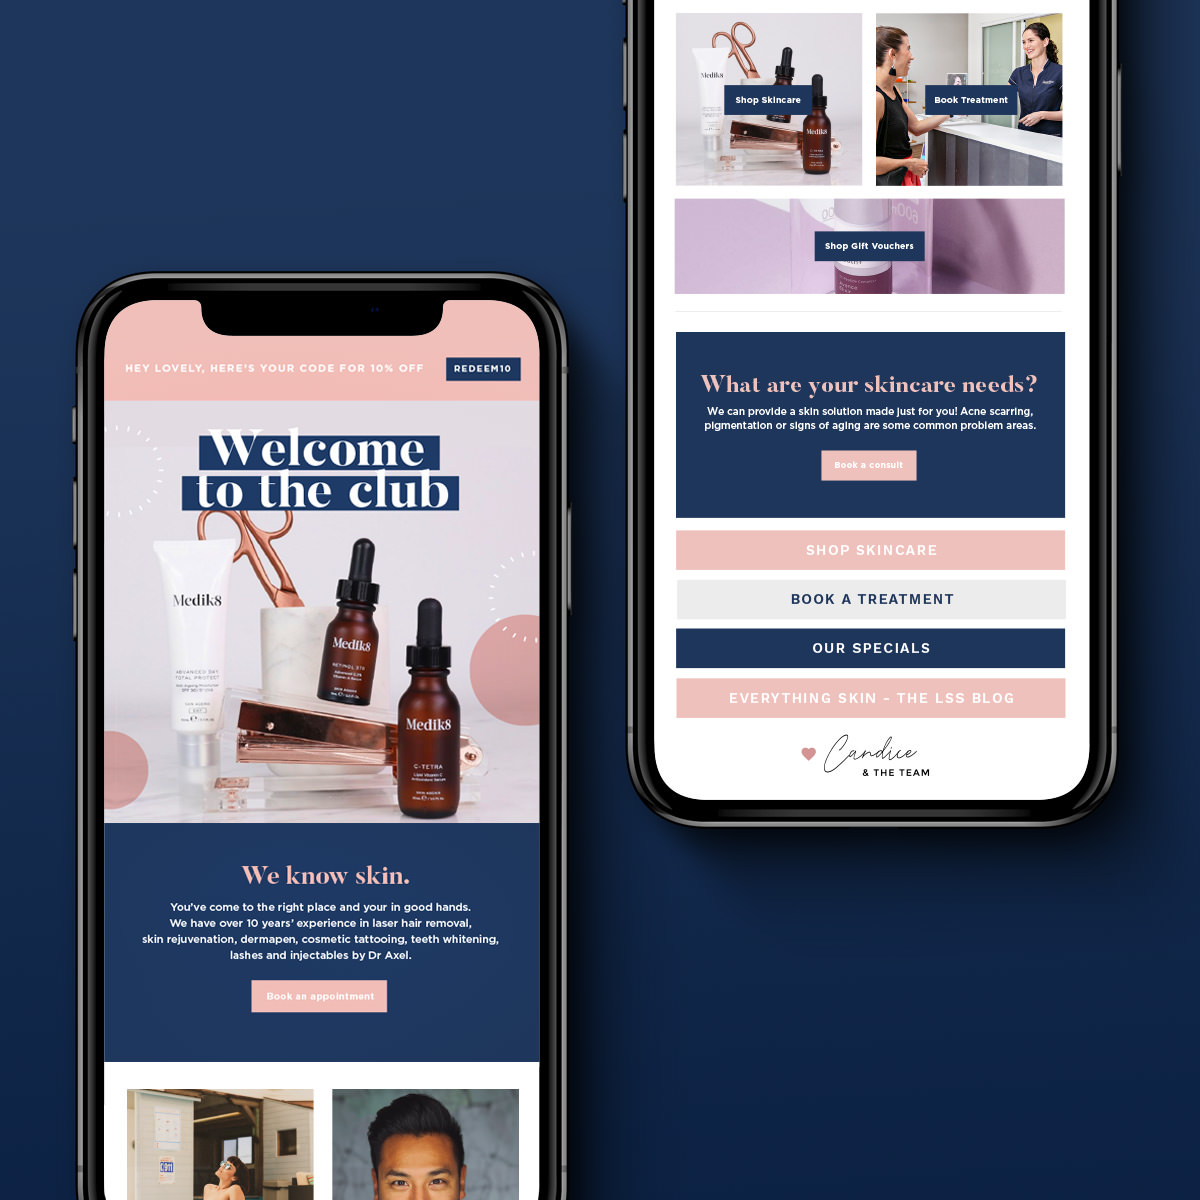 Mobile first email design for beauty company